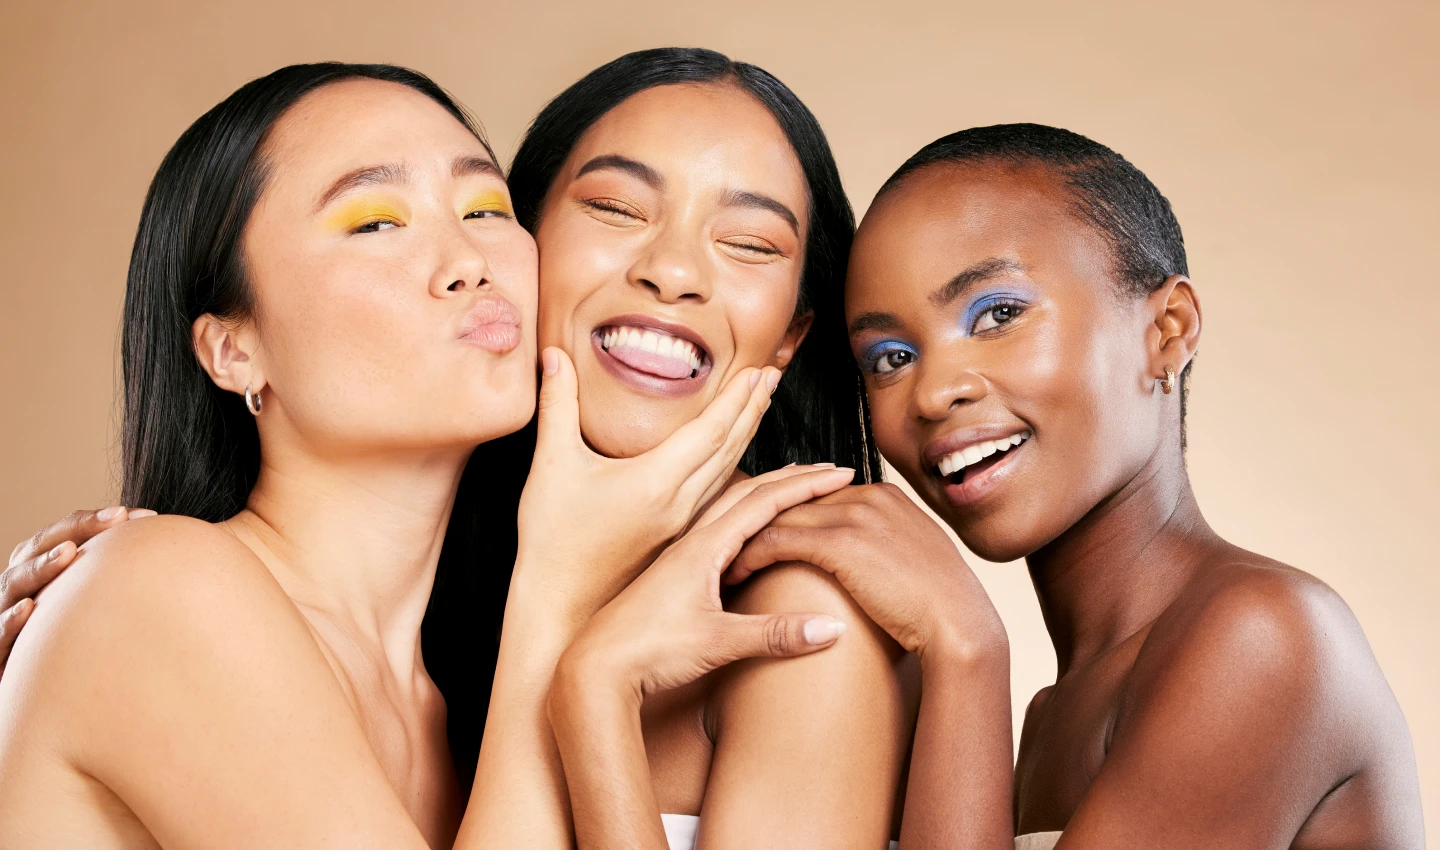 Three women of different ethnicities with expressive and artistic makeup looks using global face shades, designed to match a wide range of skin tones from around the world, smiling at the camera